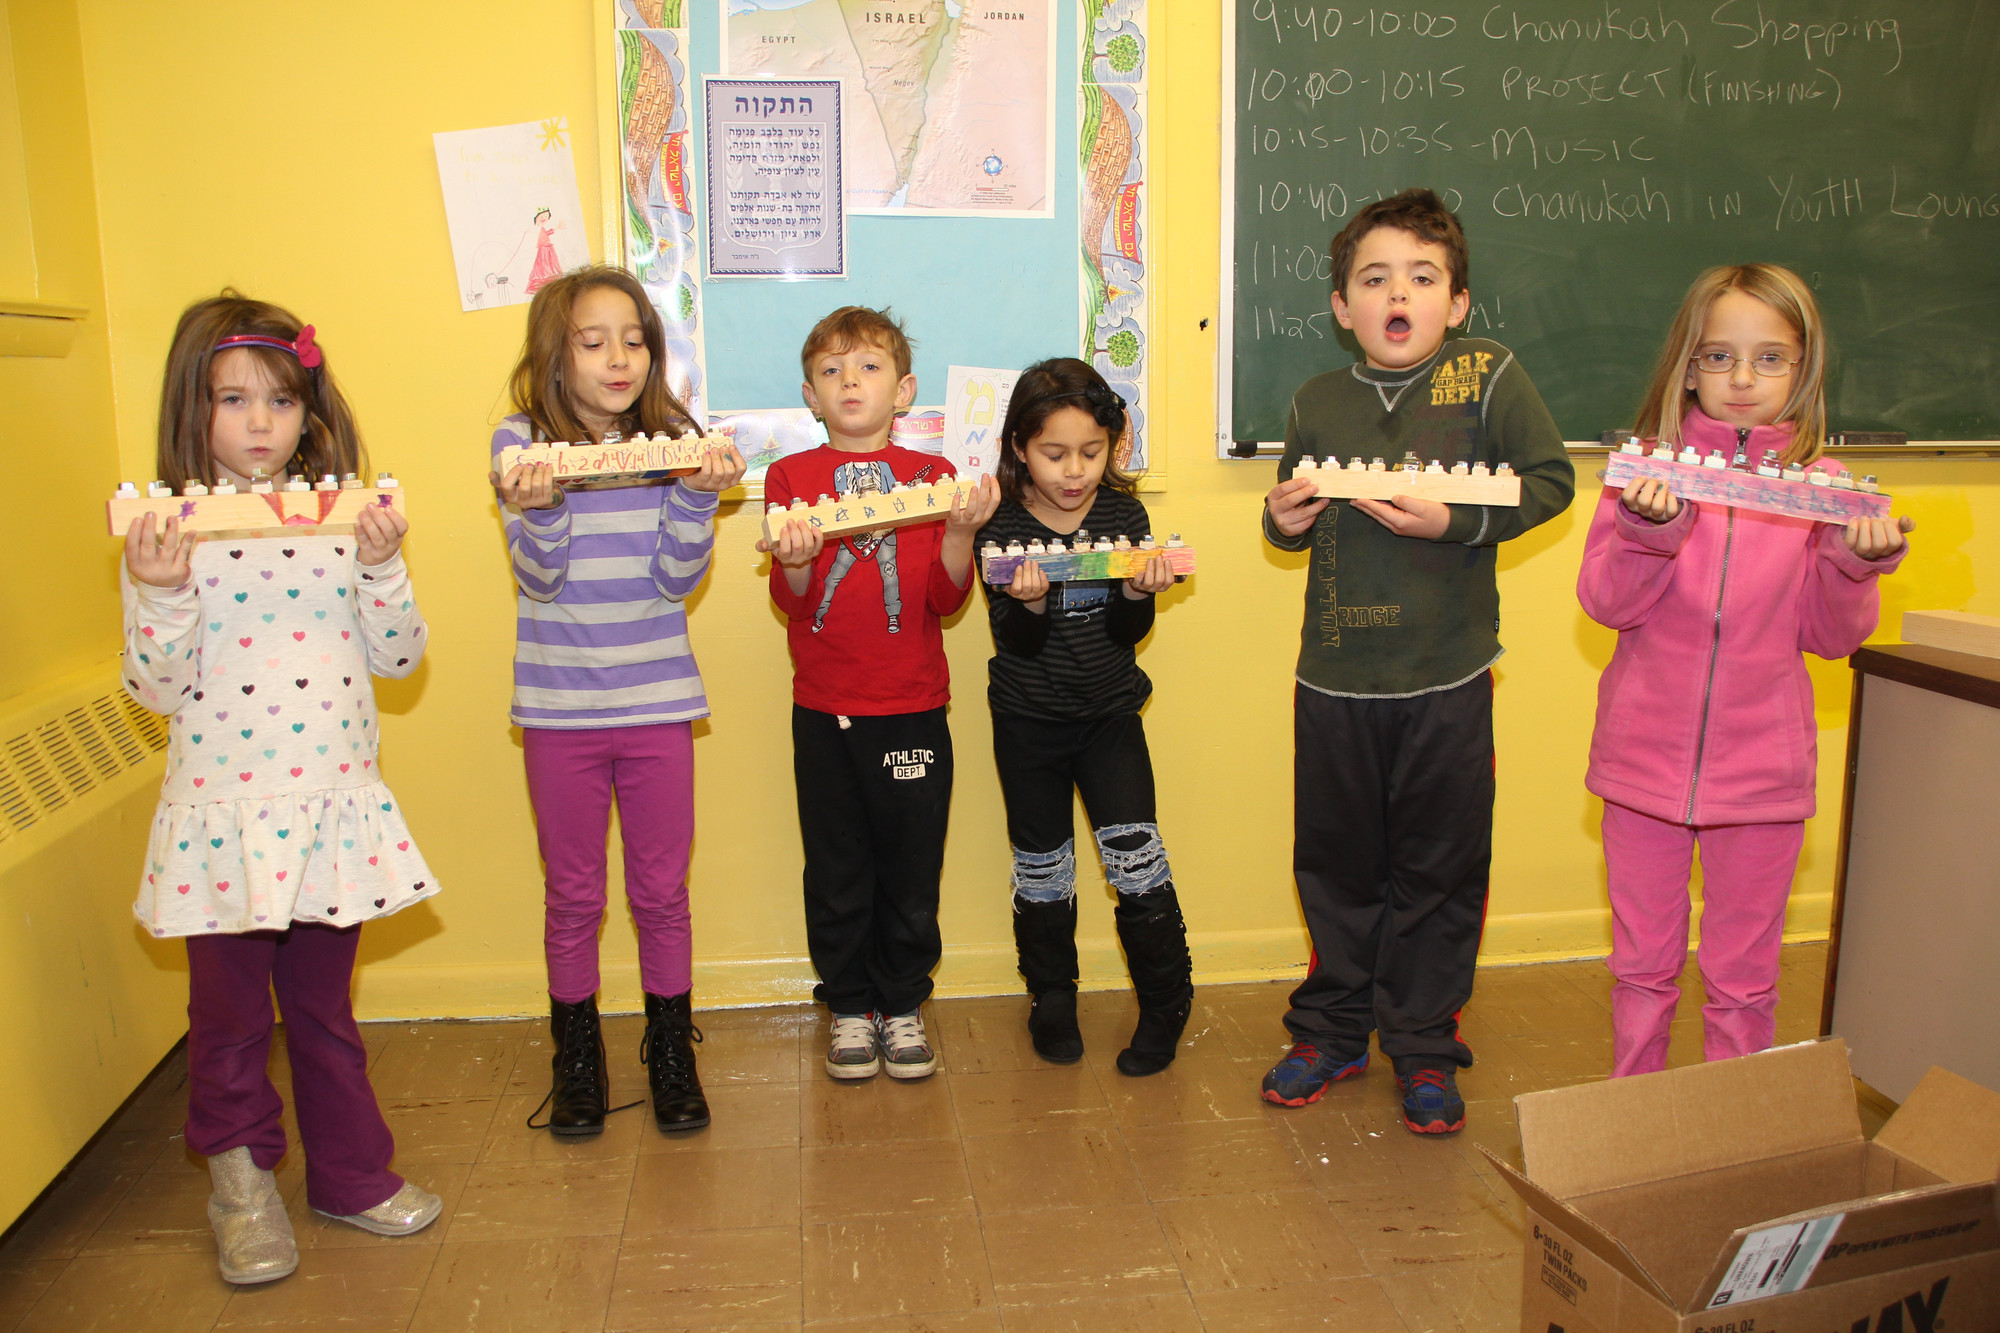 Children show the Hanukkah Candles that they made at the fair.